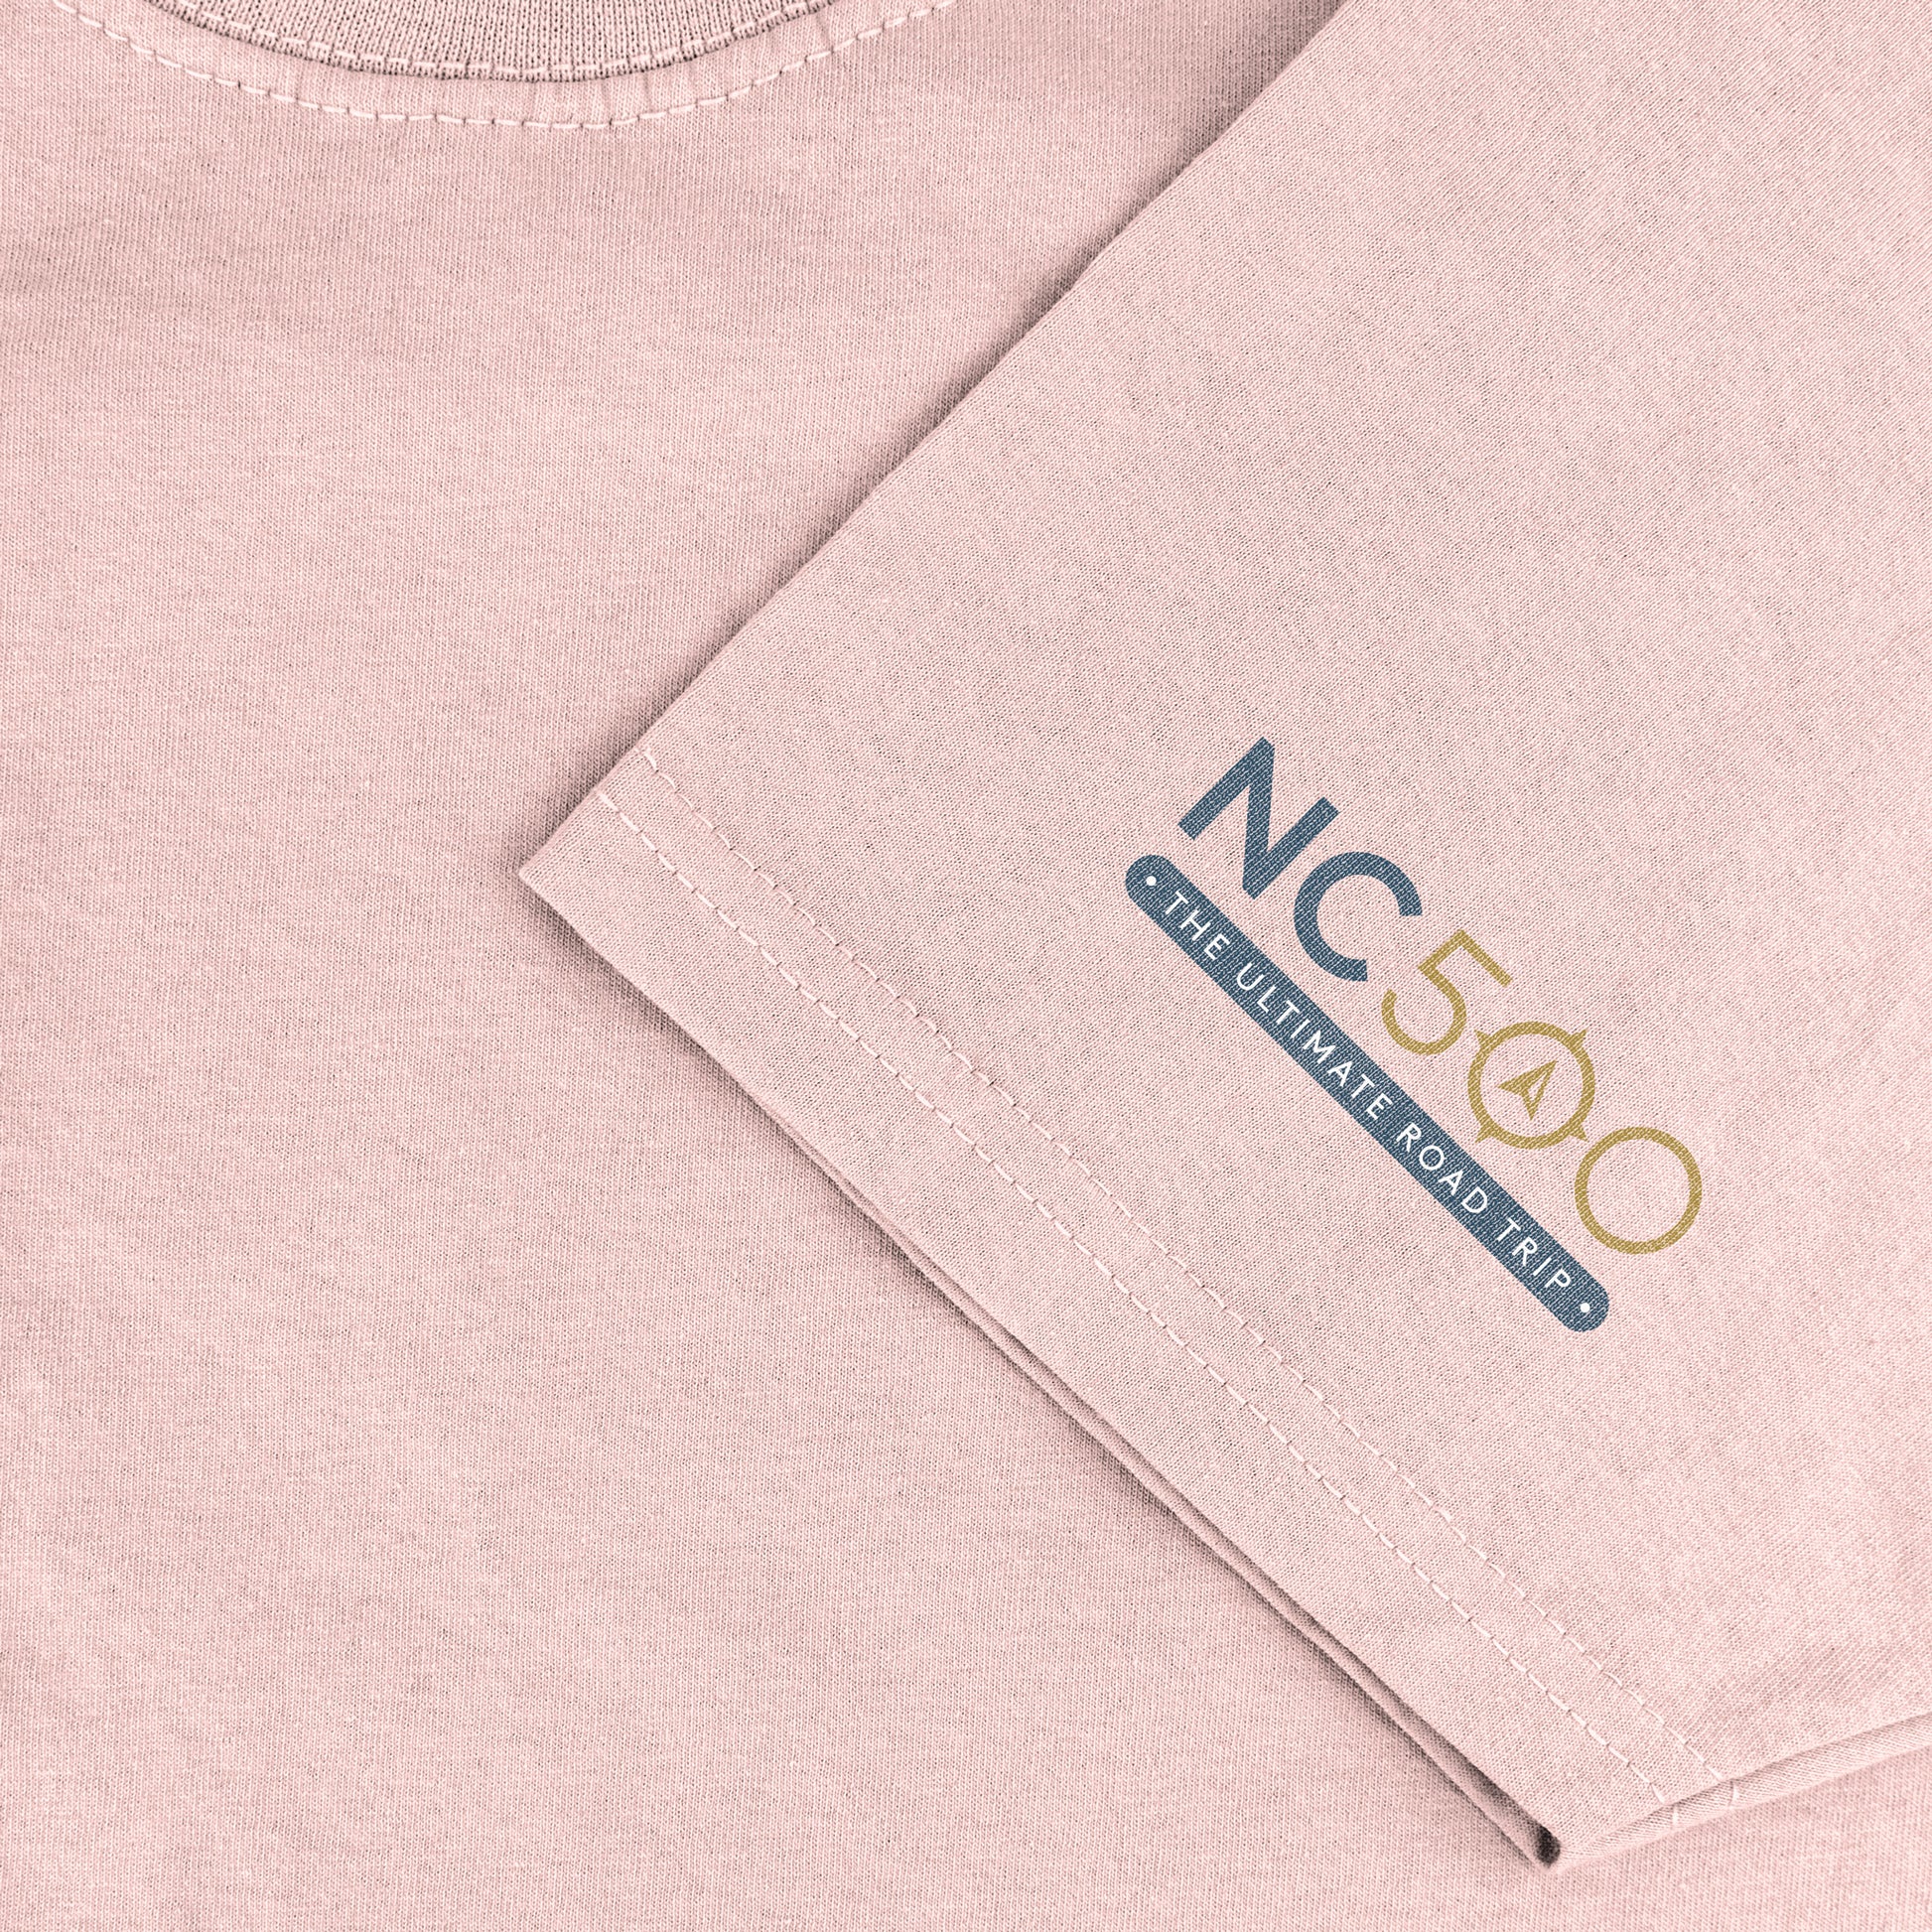 T Shirt Fitted Script North Coast 500 Sleeve